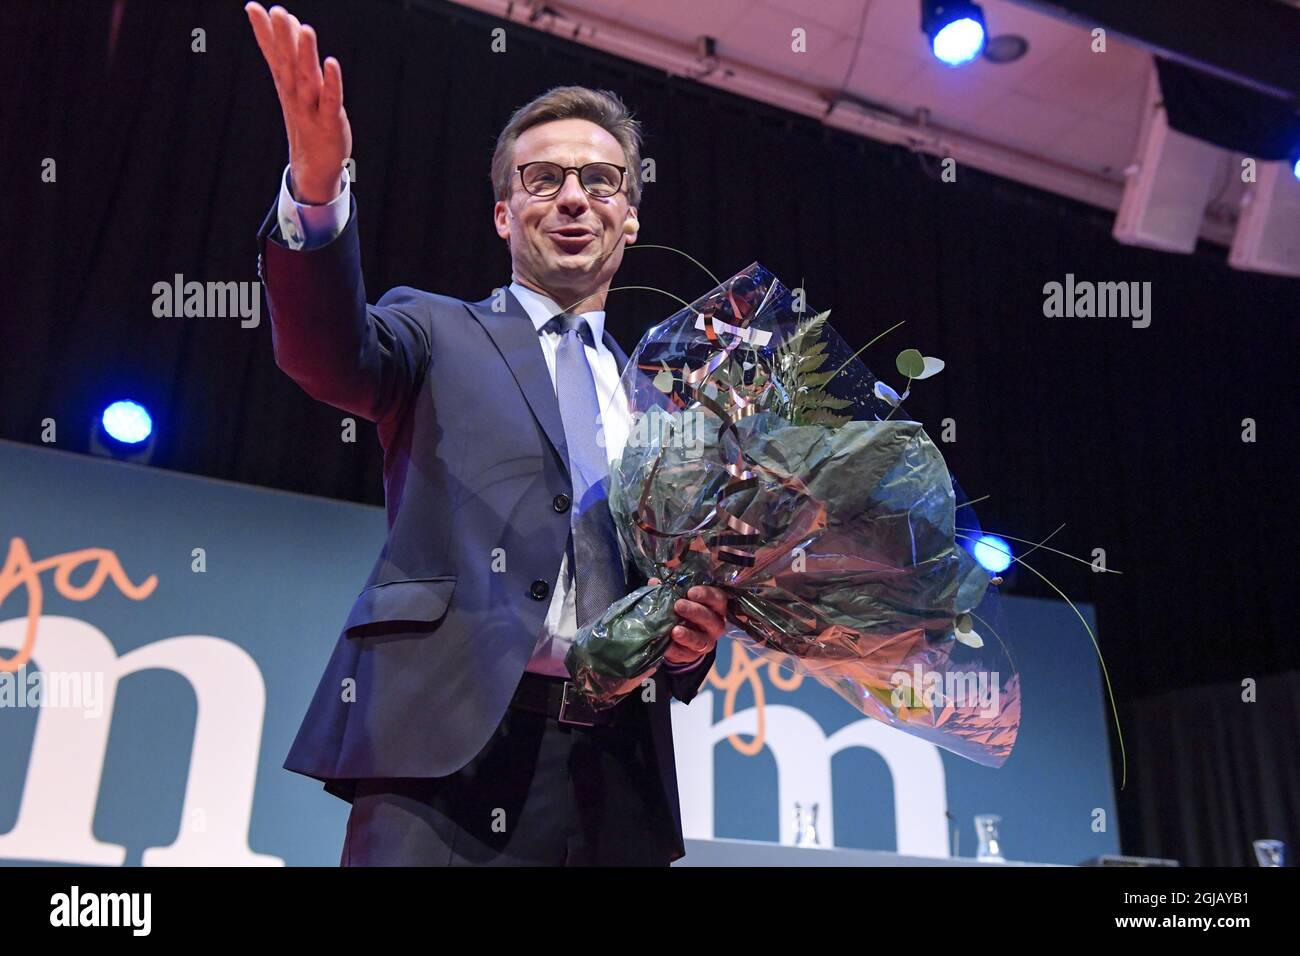 Ulf Kristersson holds flowers after beeing elected new leader of the Swedish liberal-conservative Moderate Party during a party meeting in Stockholm, Sweden, on Oct. 01, 2017. Kristersson succeeds Anna Kinberg Batra who after massive criticism in August chosed to stepped down. Photo Janerik Henriksson / TT / code 10010  Stock Photo